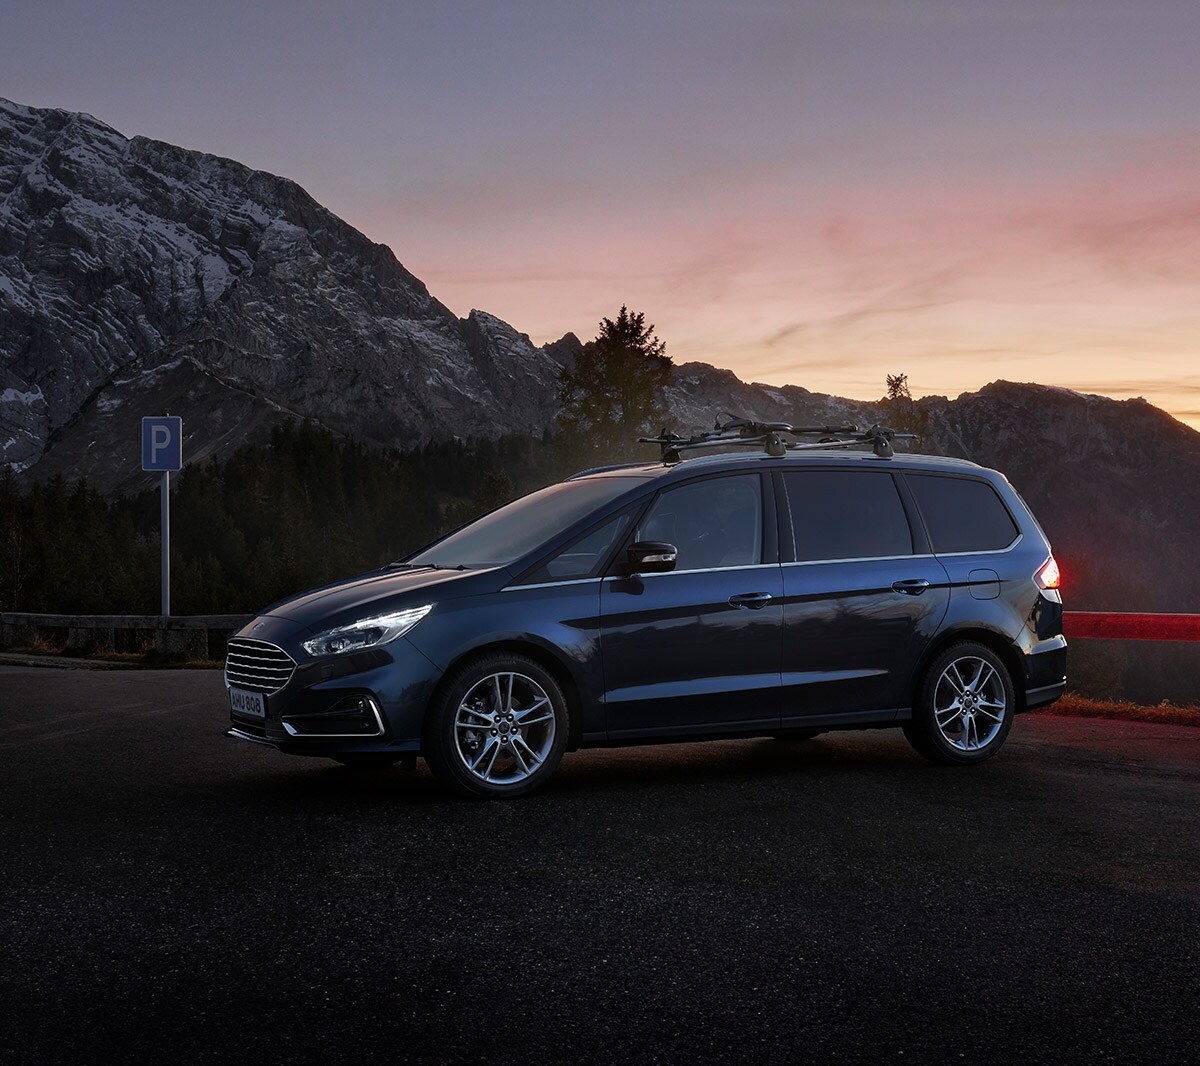 Ford Galaxy Titanium Hybrid side view at sunset